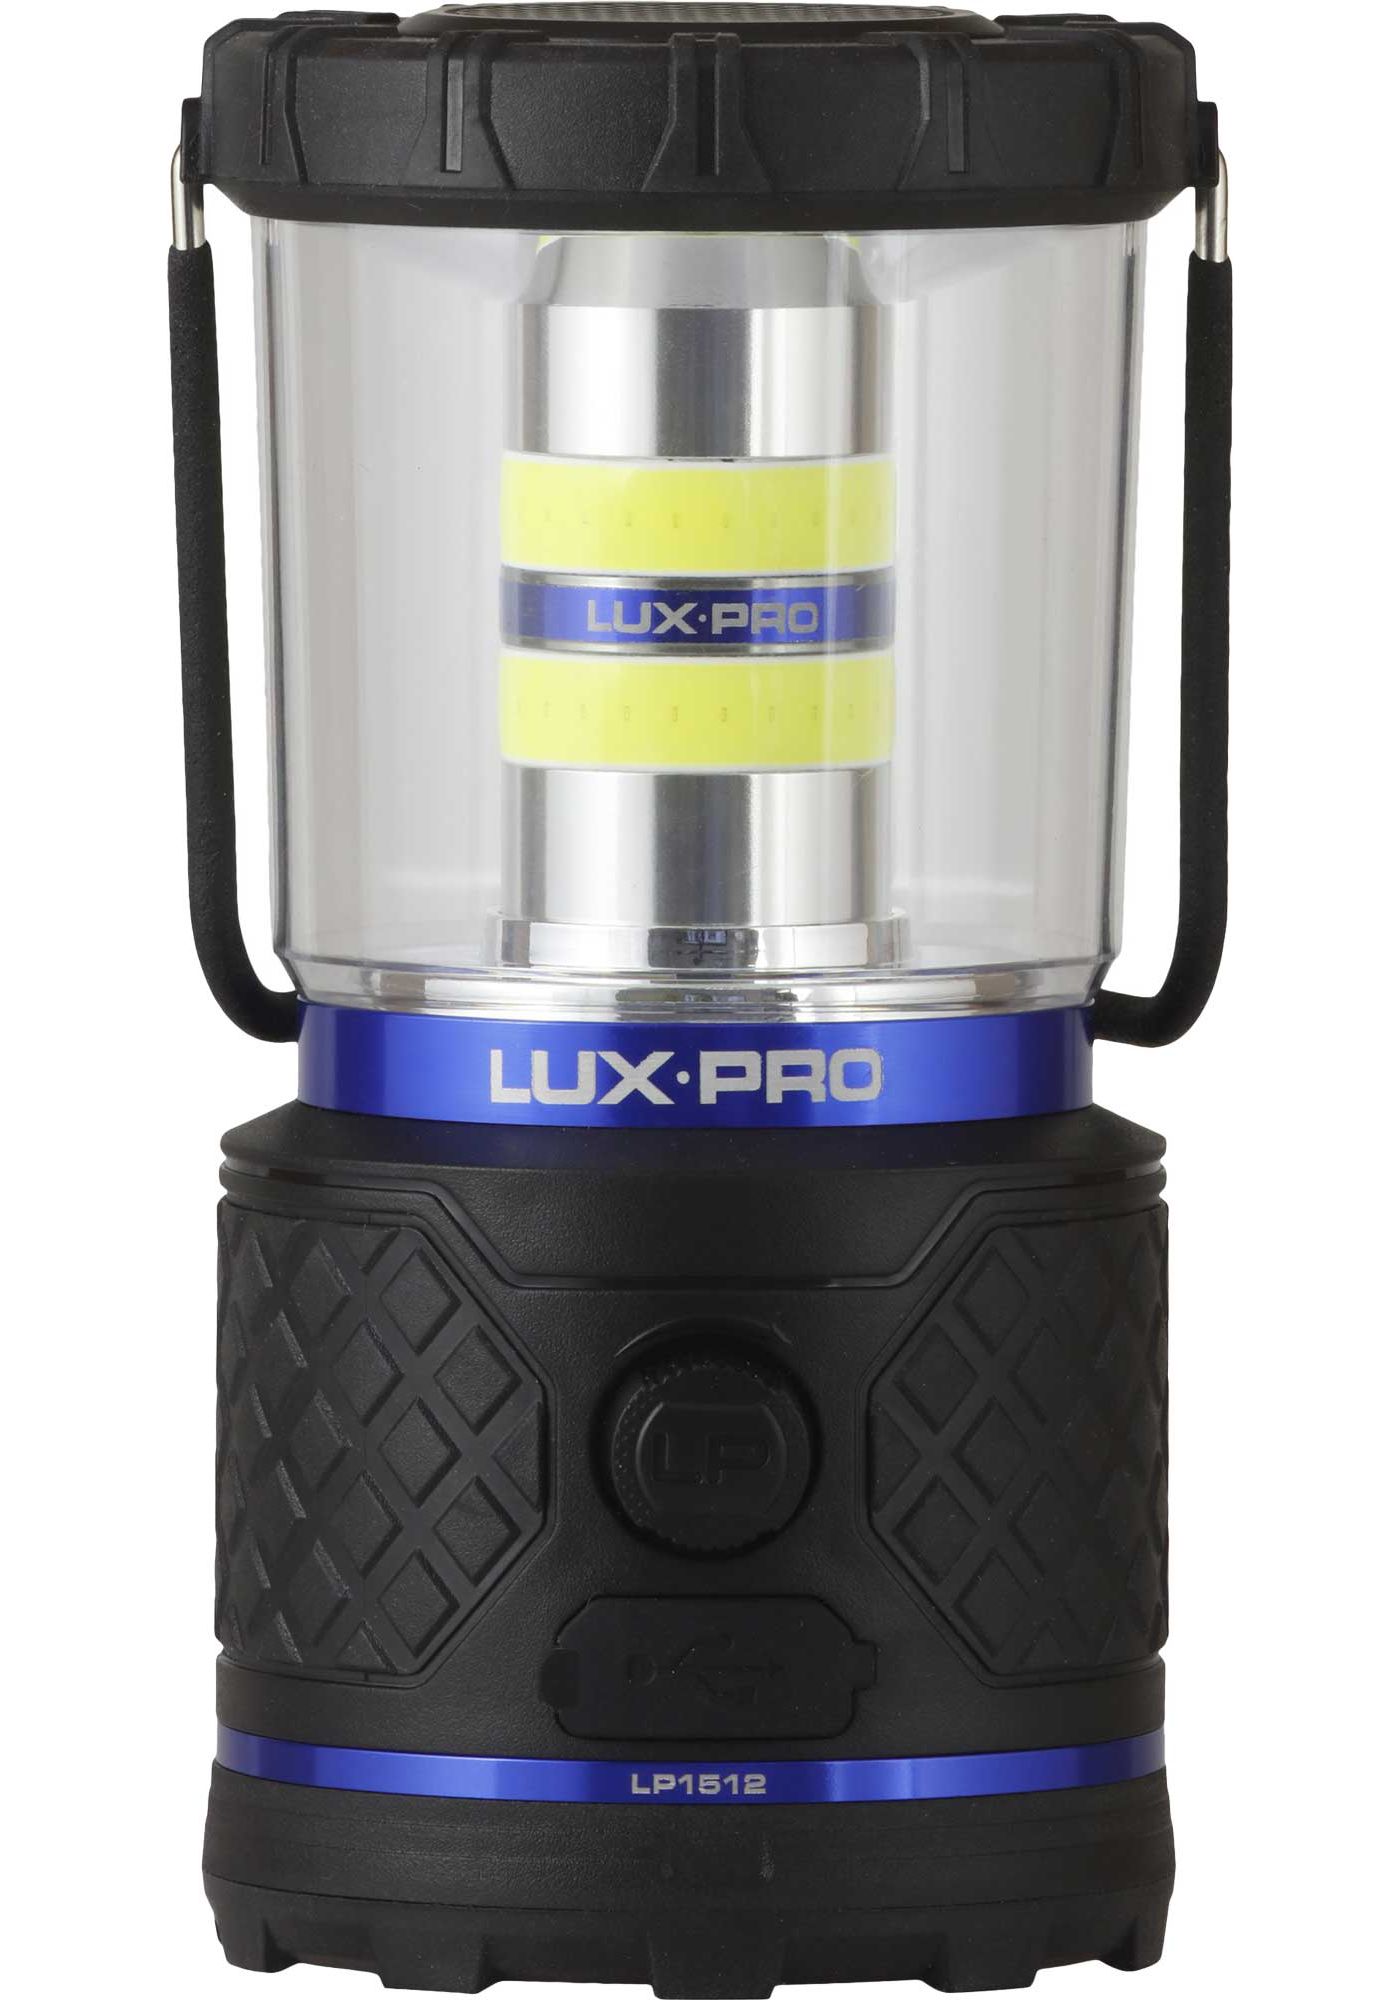 Lux Pro 1000 Lumen Rechargeable LED Lantern DICK'S Sporting Goods